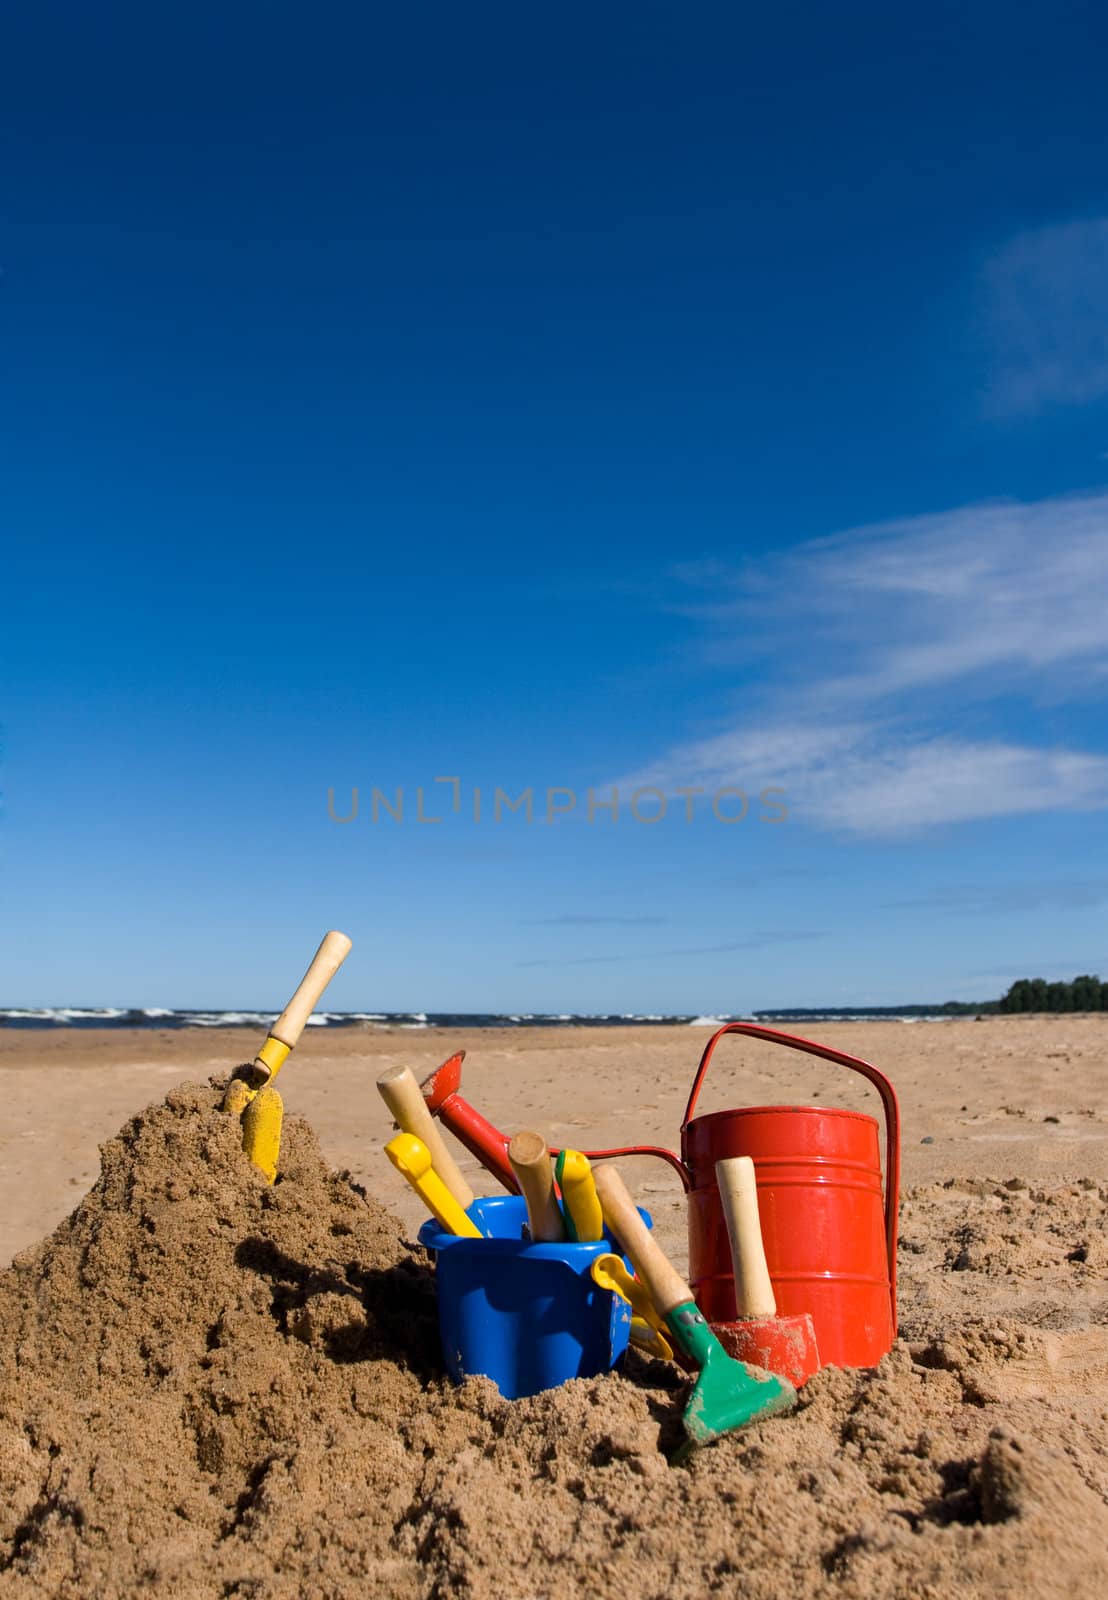 Red watering can, plastic blue bucket and other beach toys in the sandy seashore